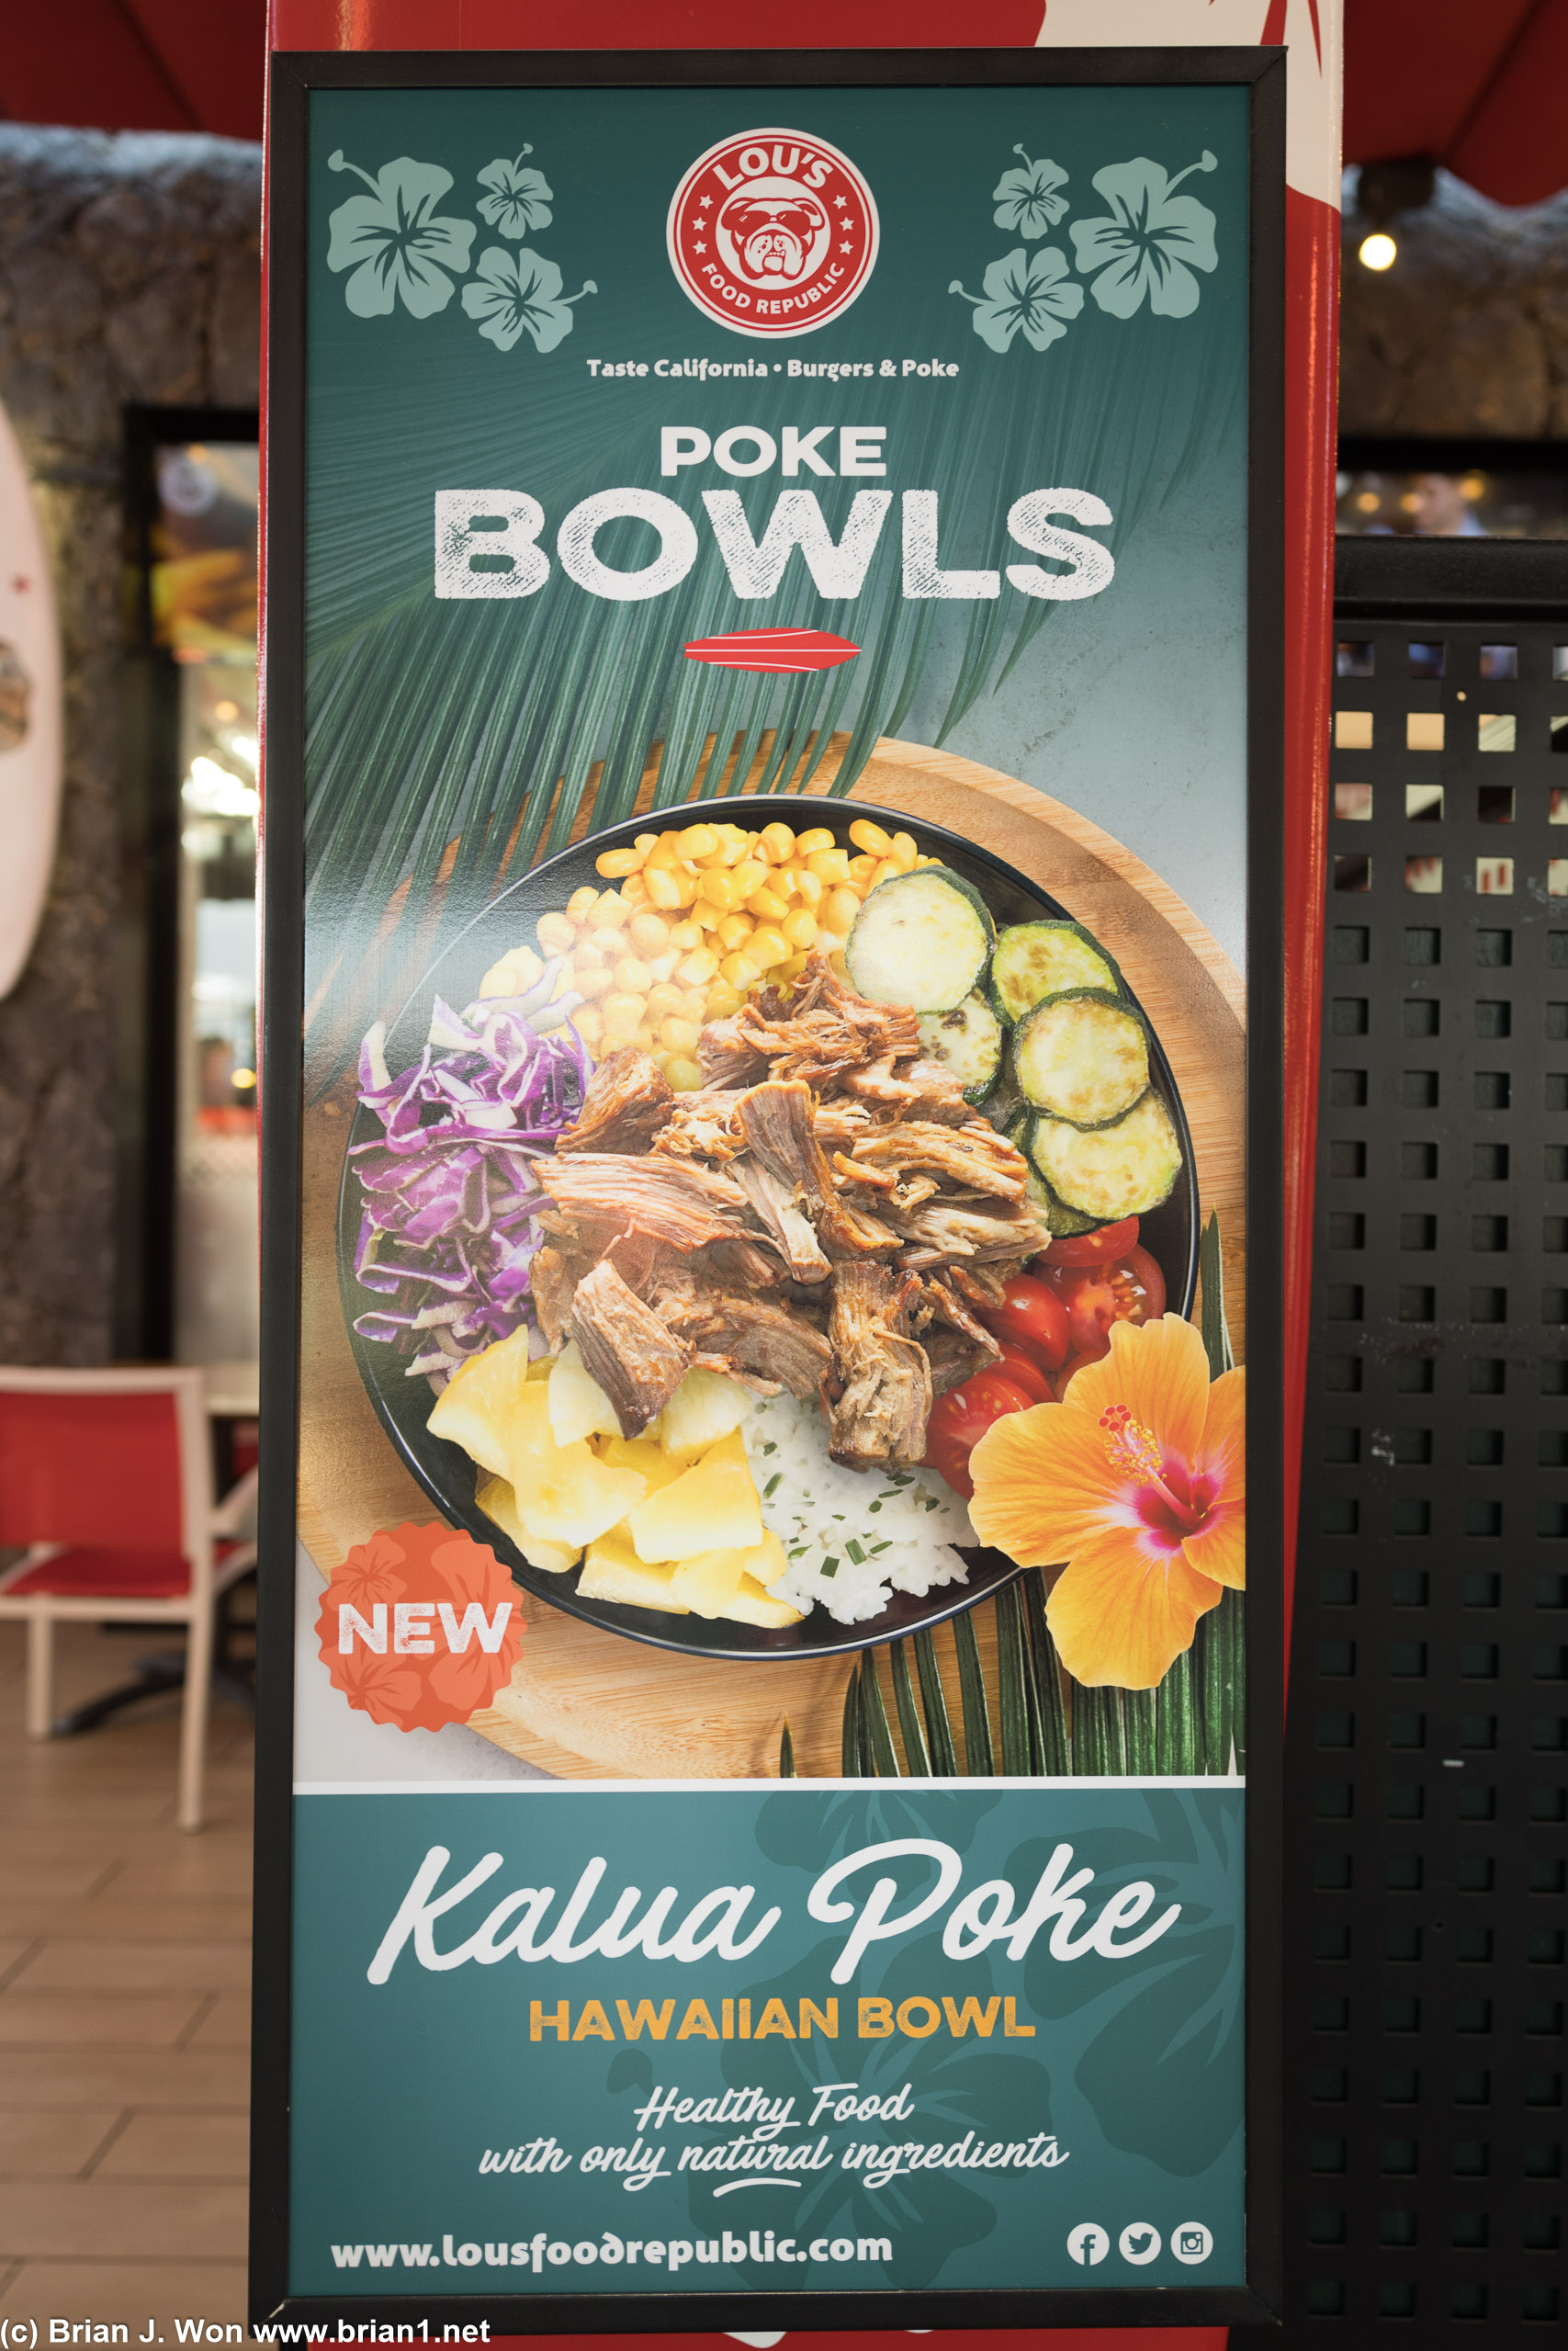 A poke bowl with cooked pork and not raw fish is not a poke bowl.